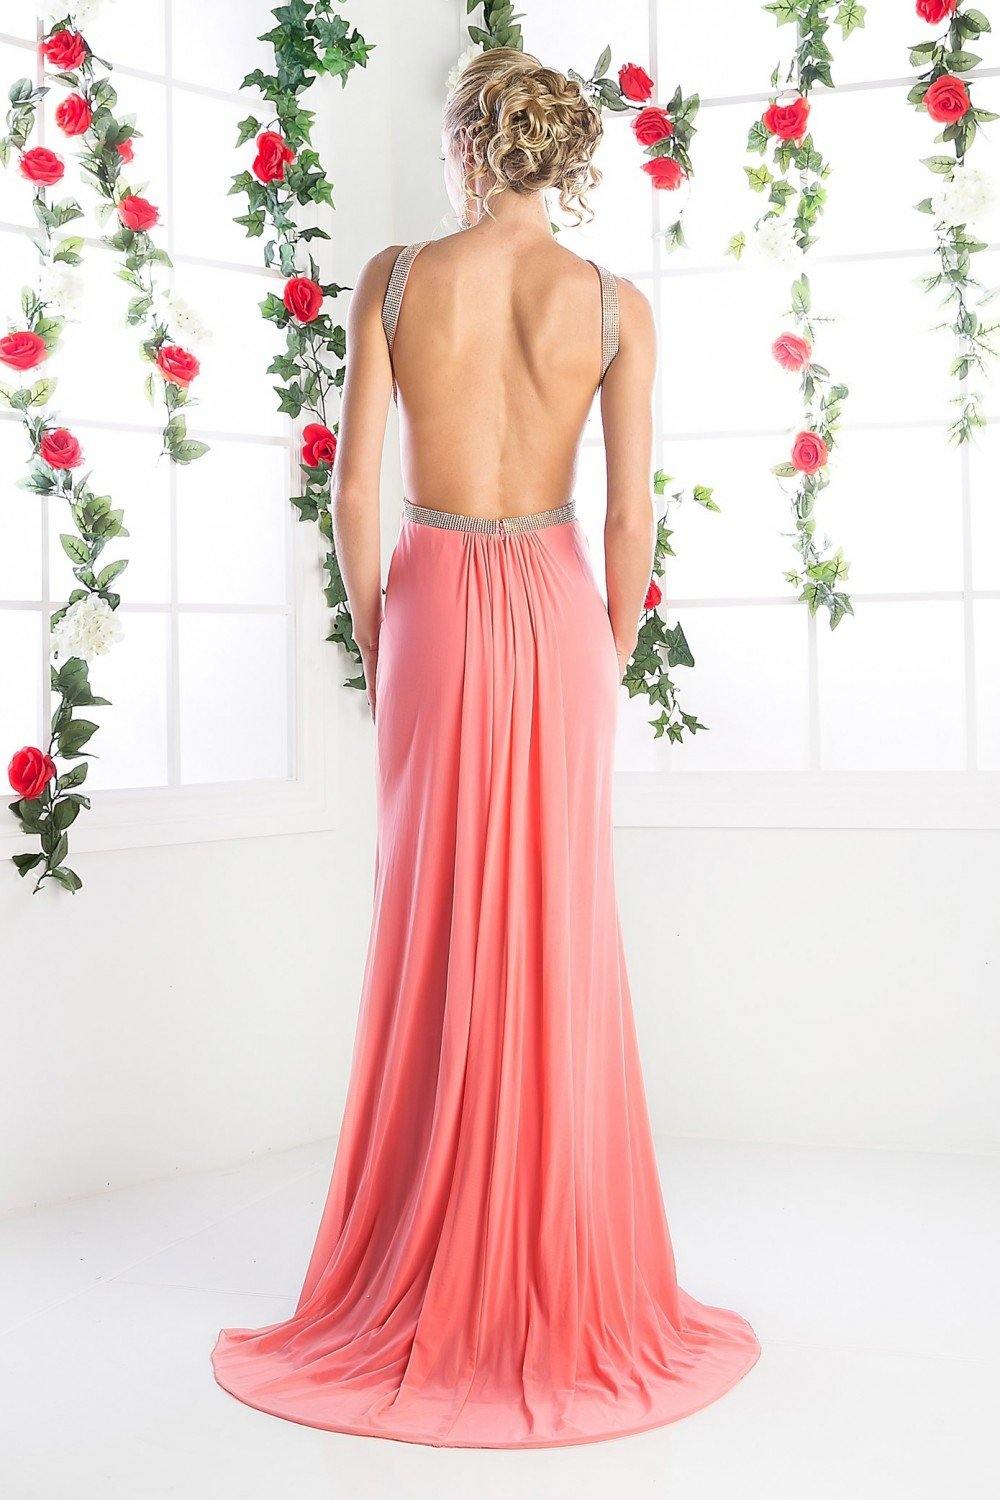 Sexy Long Prom Dress - The Dress Outlet